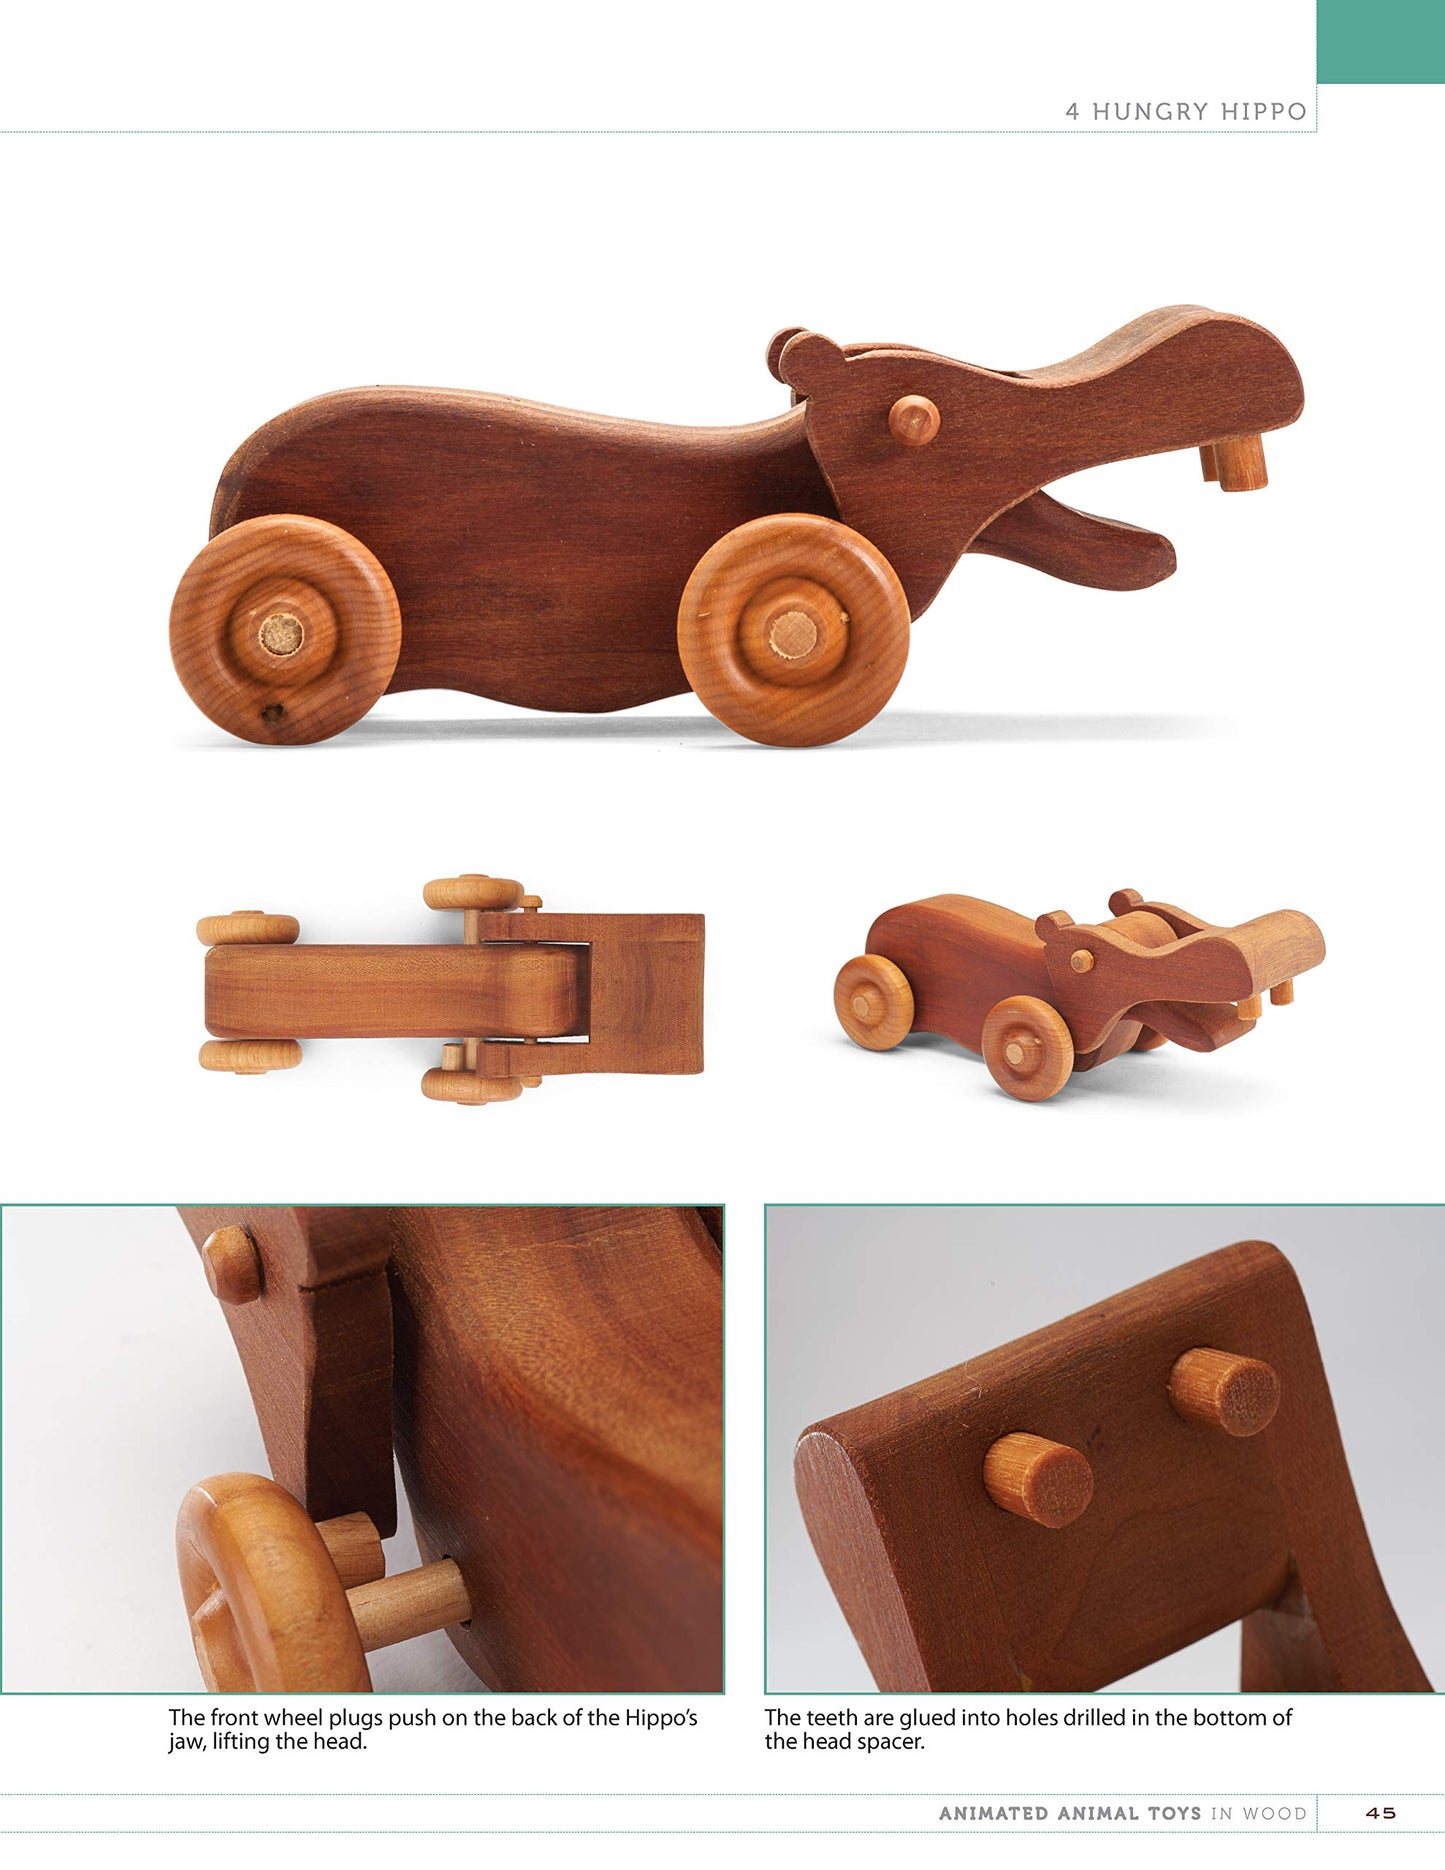 Animated Animal Toys in Wood: 20 Projects that Walk, Wobble & Roll (Fox Chapel Publishing) Patterns & Directions for Making Dinosaurs, a Shark, Duck,